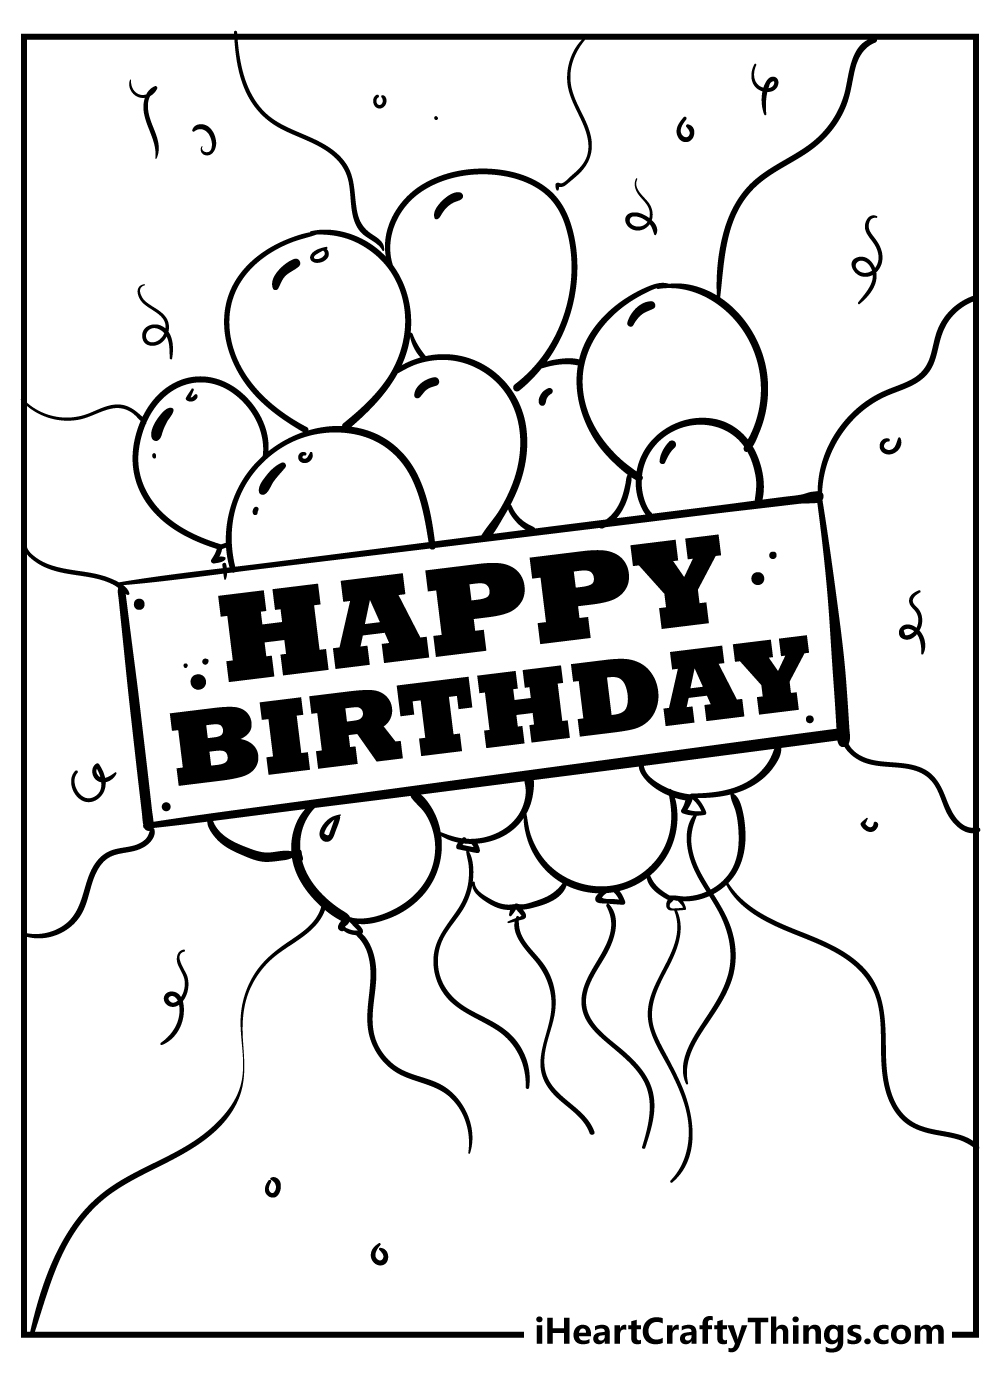 Printable Happy Birthday Coloring Pages Updated 20